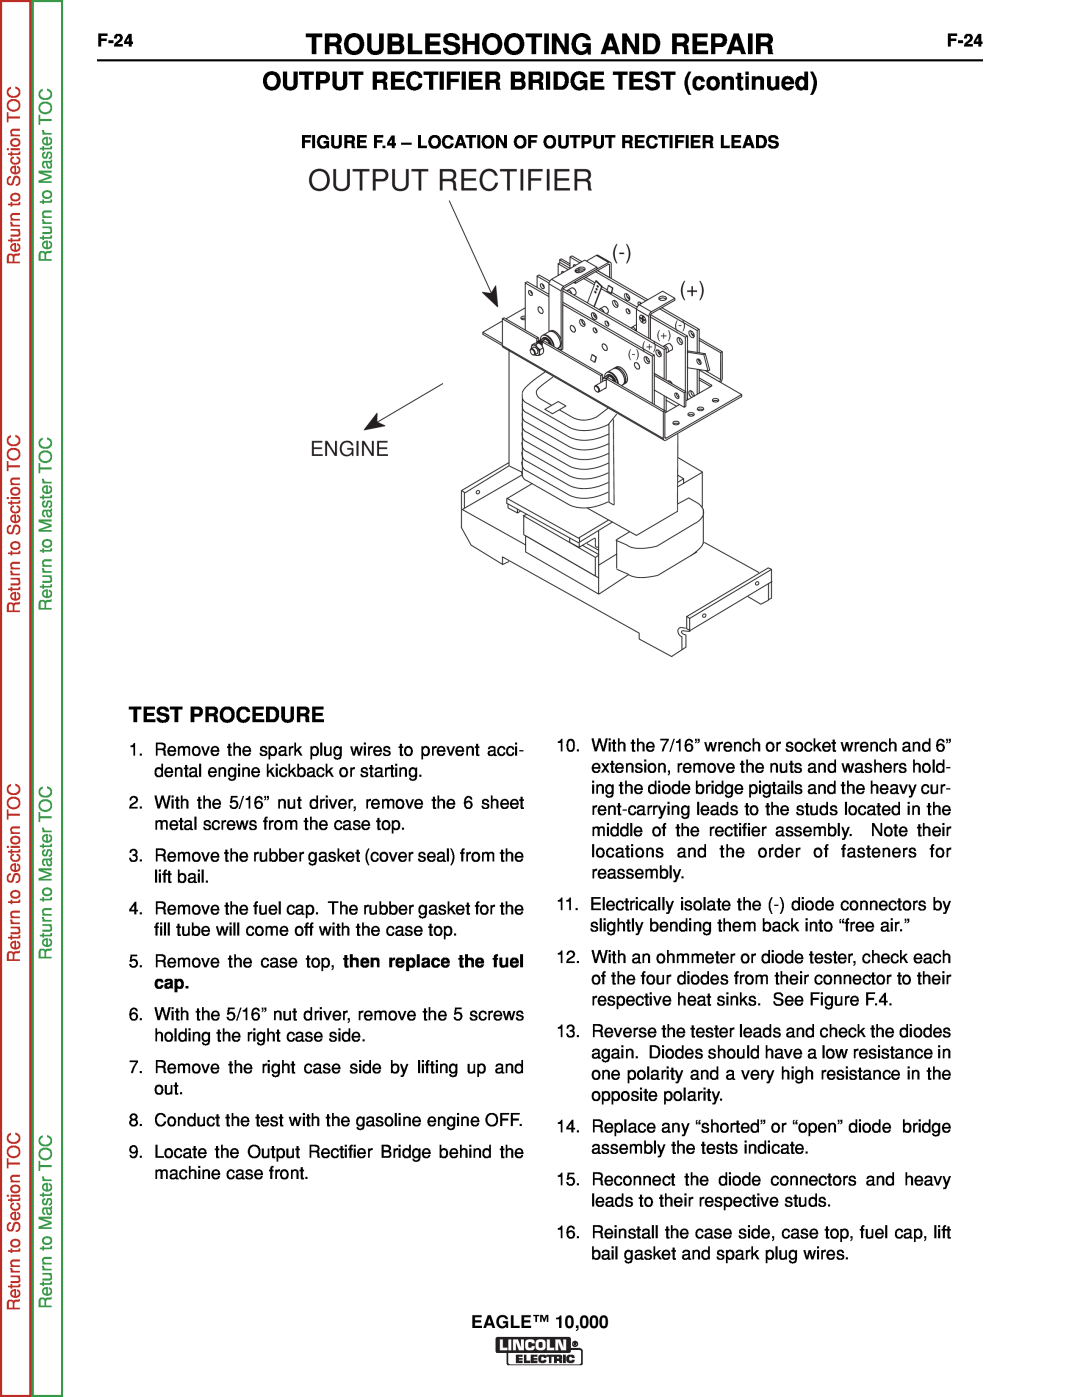 Lincoln Electric SVM192-A OUTPUT RECTIFIER BRIDGE TEST continued, Engine, F-24, Output Rectifier, Test Procedure 